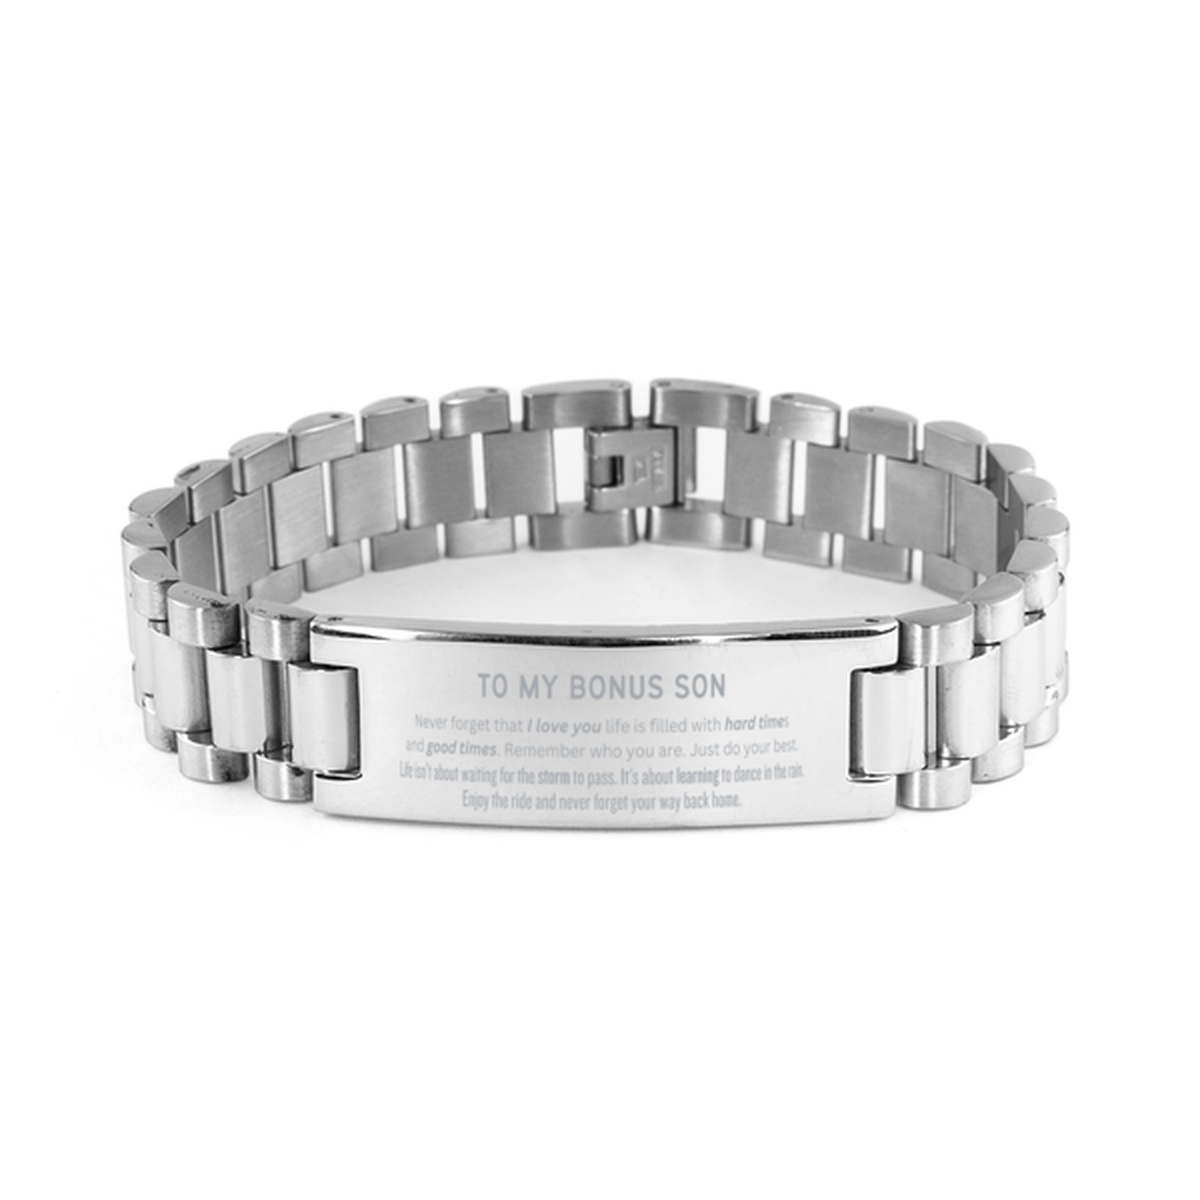 Christmas Bonus Son Ladder Stainless Steel Bracelet Gifts, To My Bonus Son Birthday Thank You Gifts For Bonus Son, Graduation Unique Gifts For Bonus Son To My Bonus Son Never forget that I love you life is filled with hard times and good times. Remember w